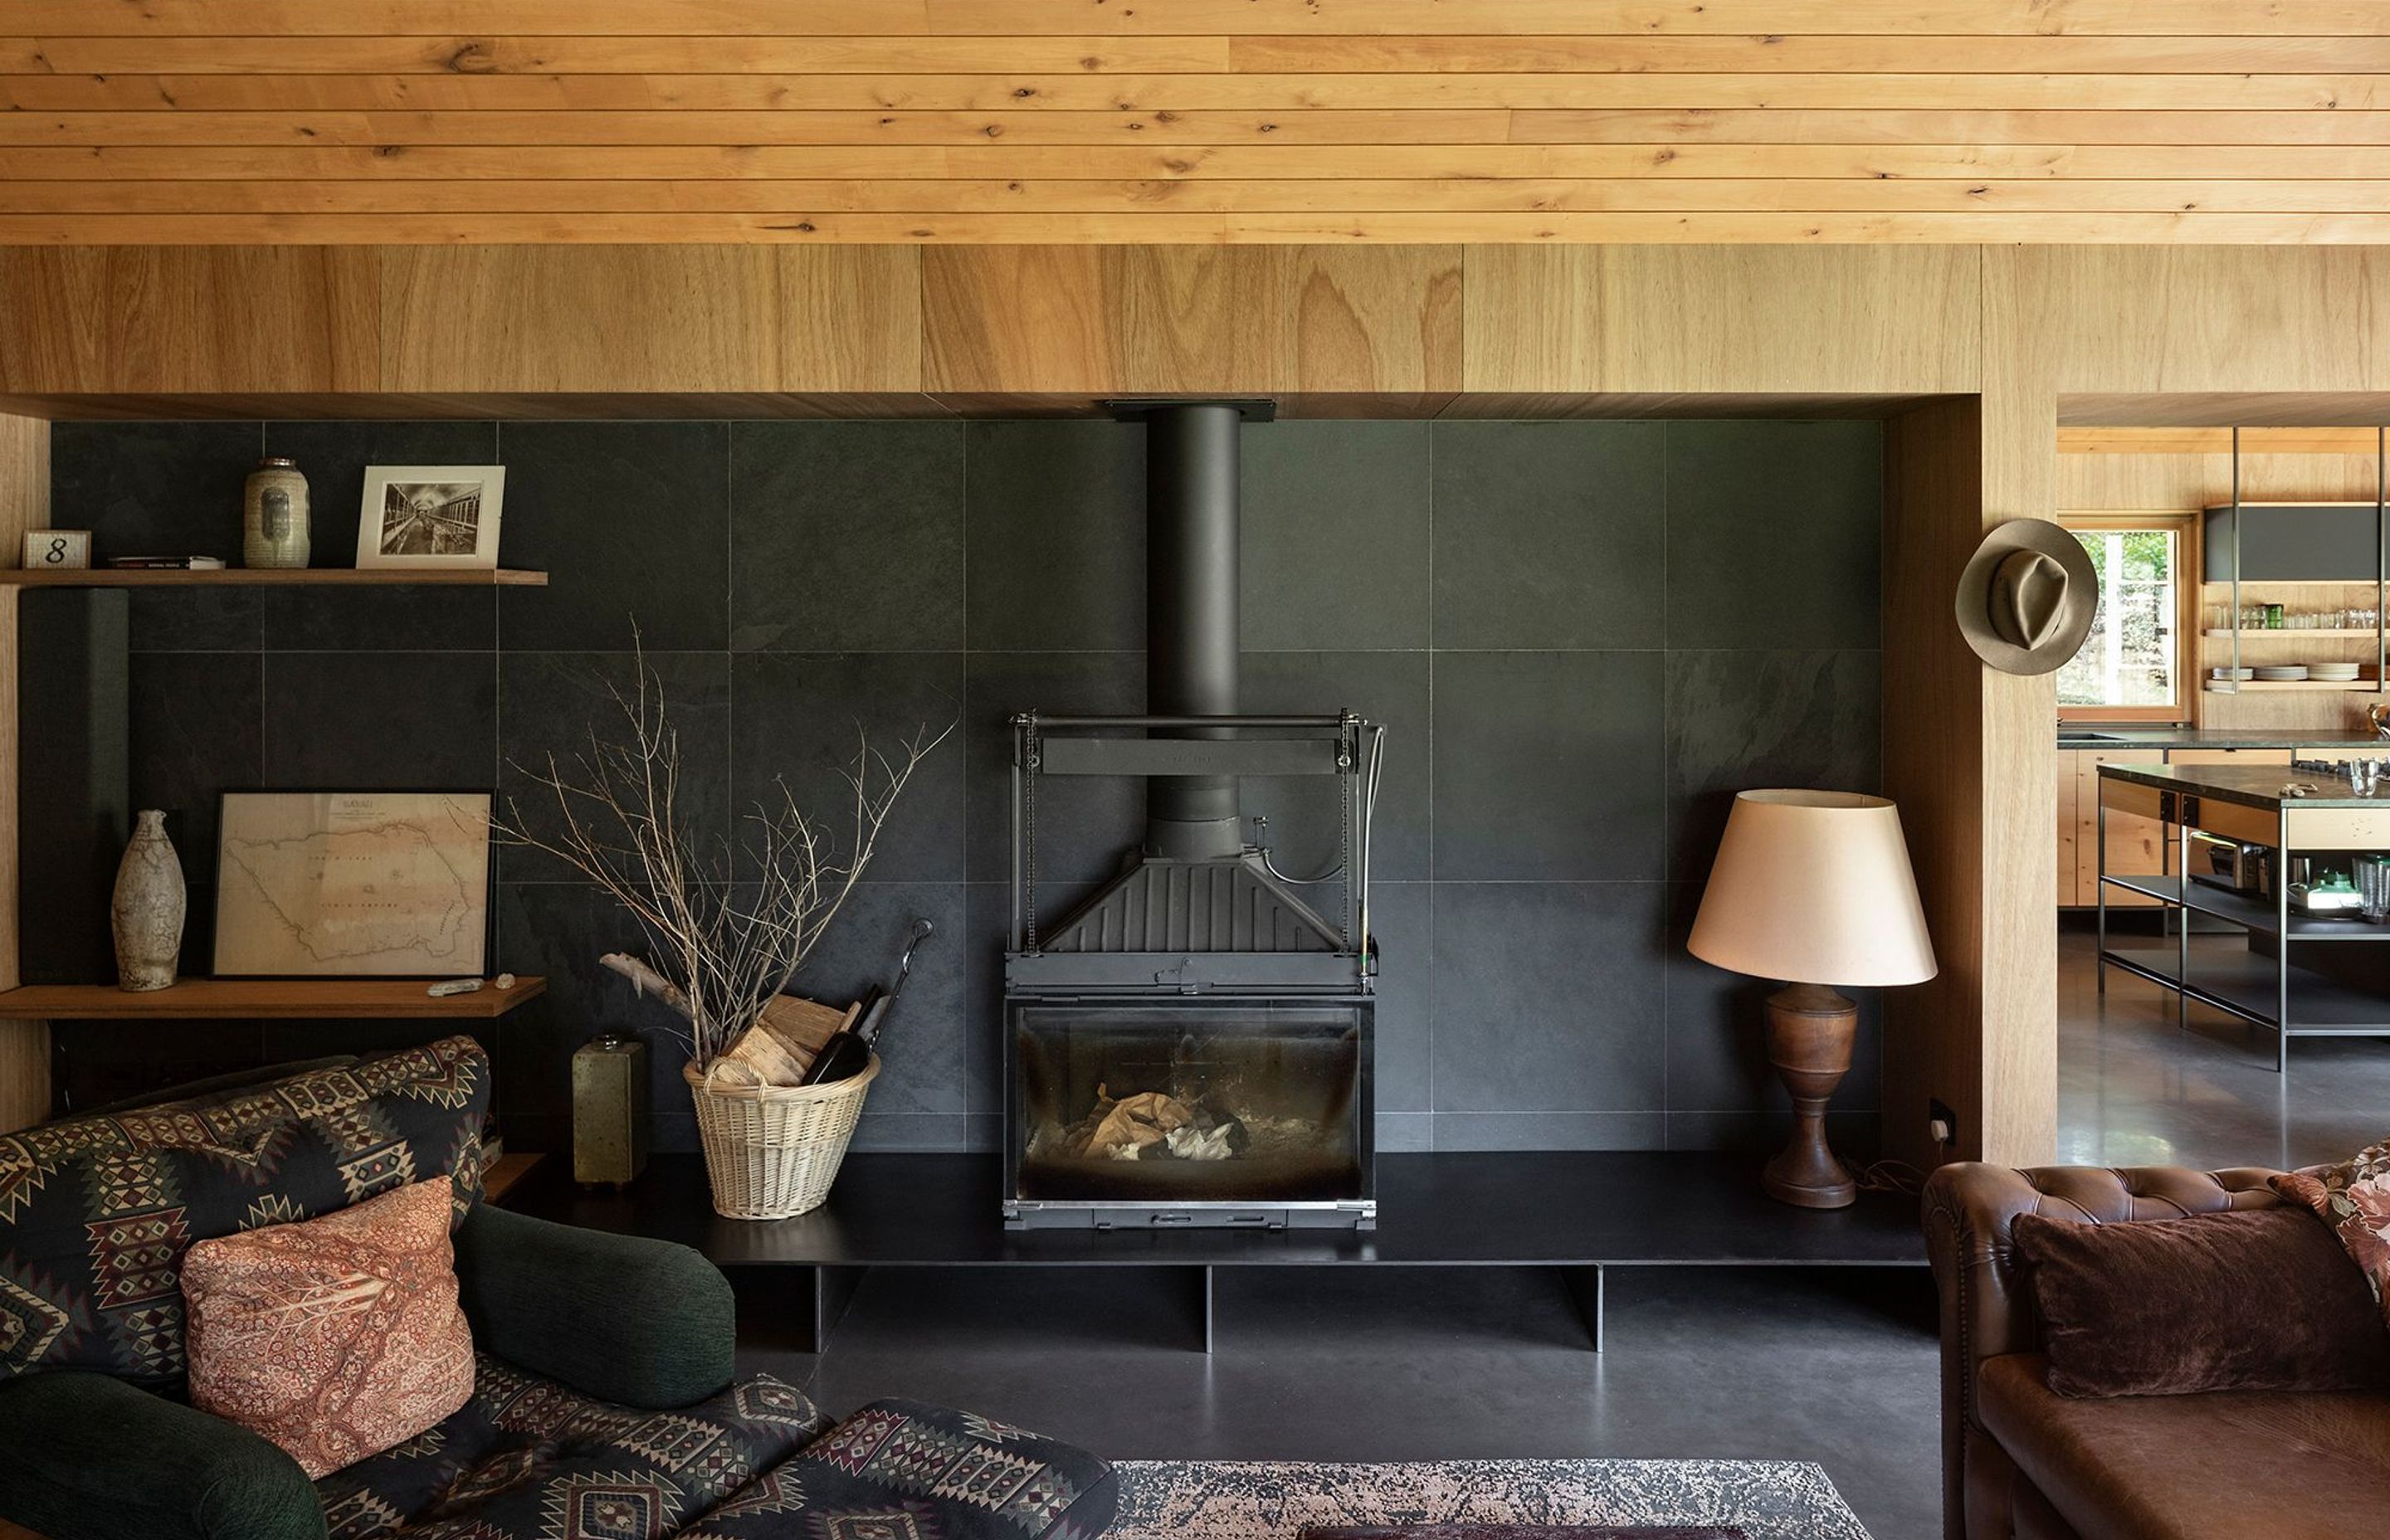 'A bit Steampunk', the inner workings of the fireplace are exposed and unfinished. Granite tiles, Tasmanian blackwood ply walls and southern silver beech ceilings complete the look.